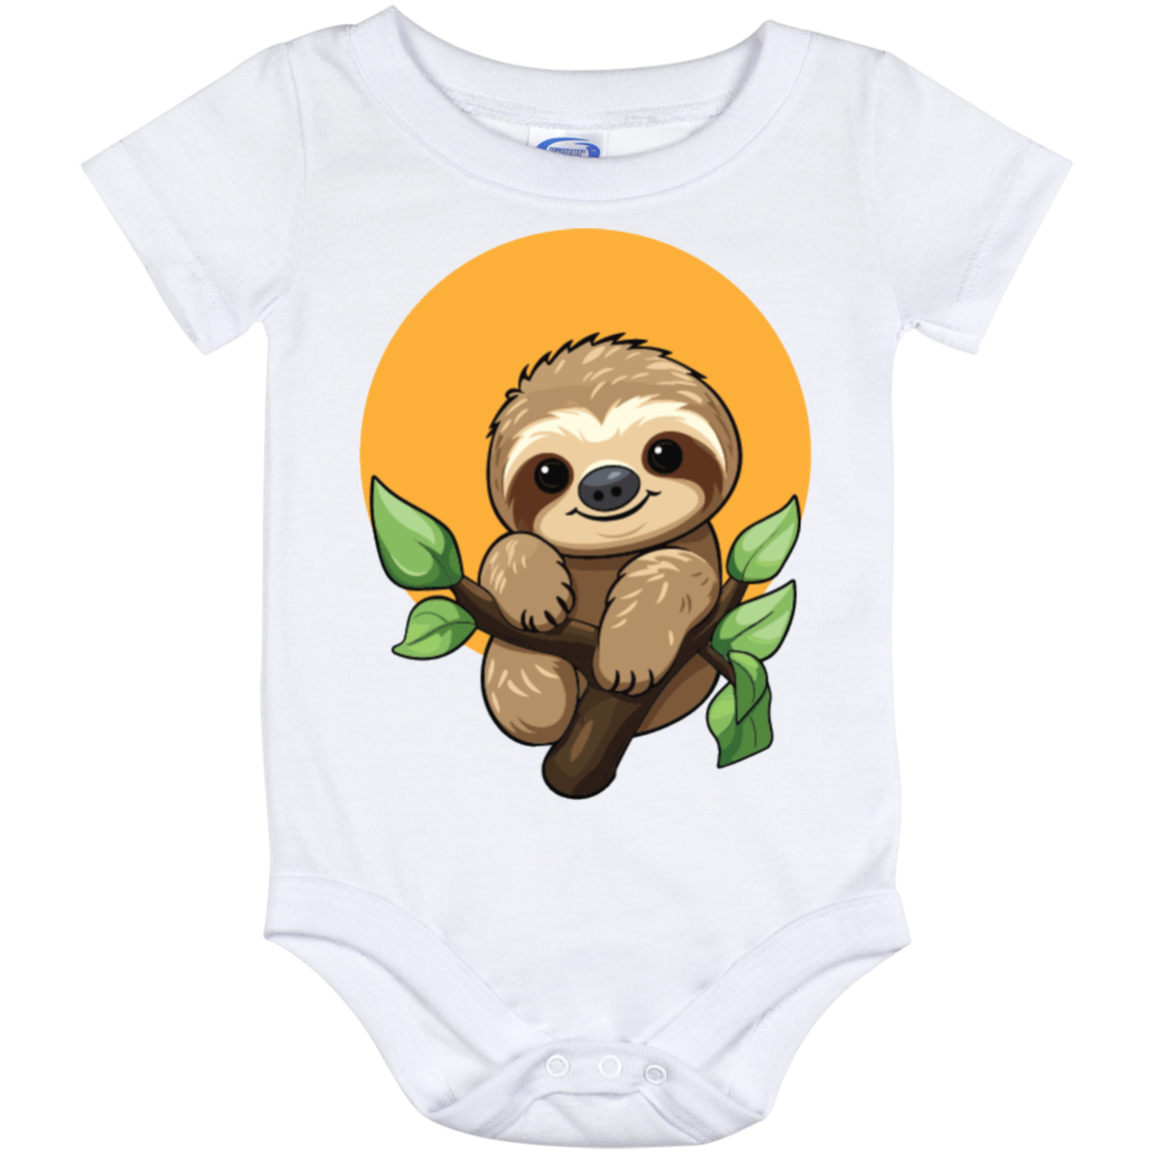 Sid the Sloth Onesie 12 Month - Biosafety Now Shop